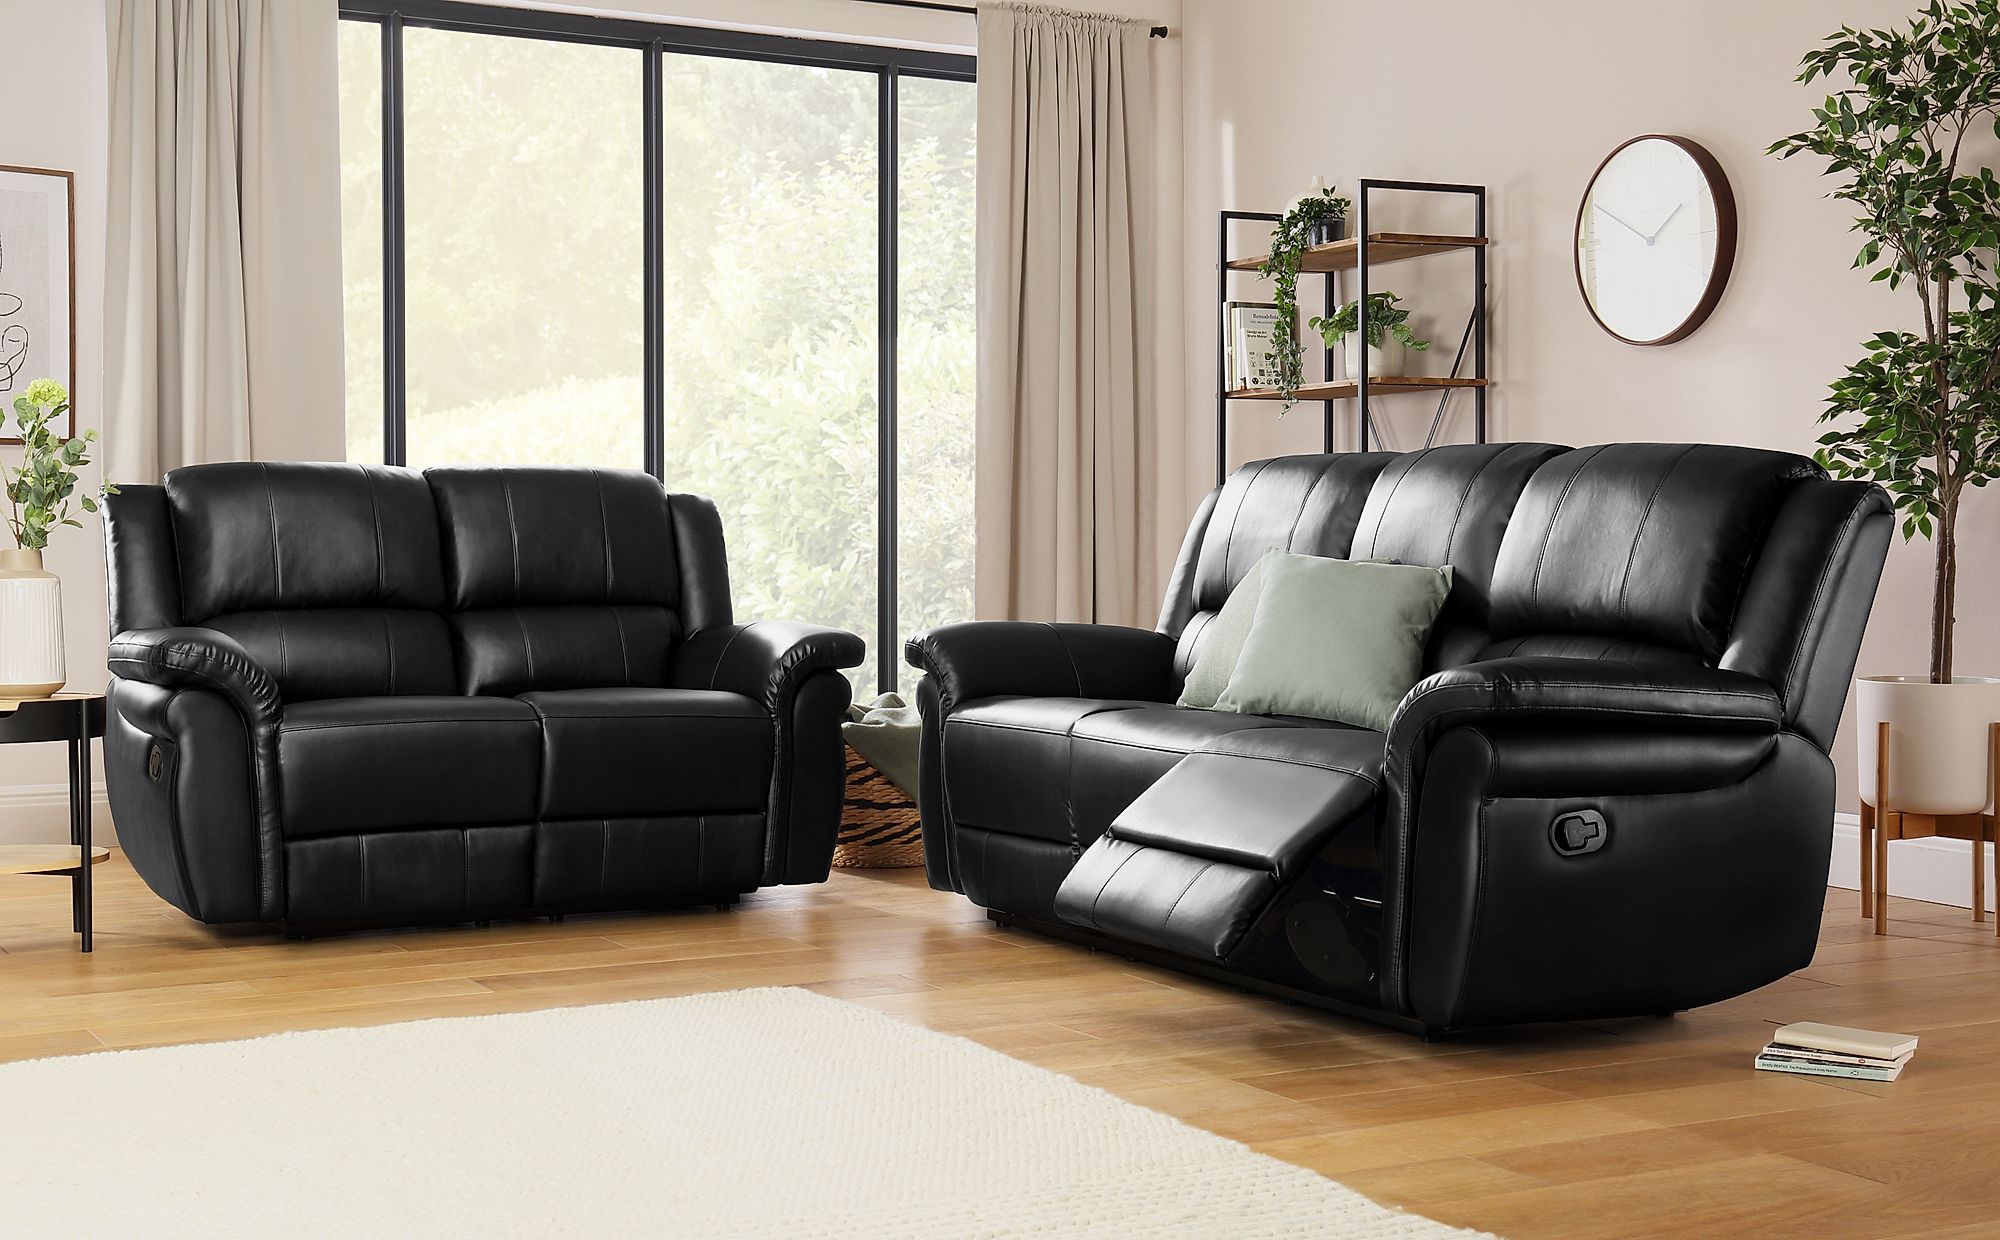 Black Leather Sofa And Chair Set - About Chair